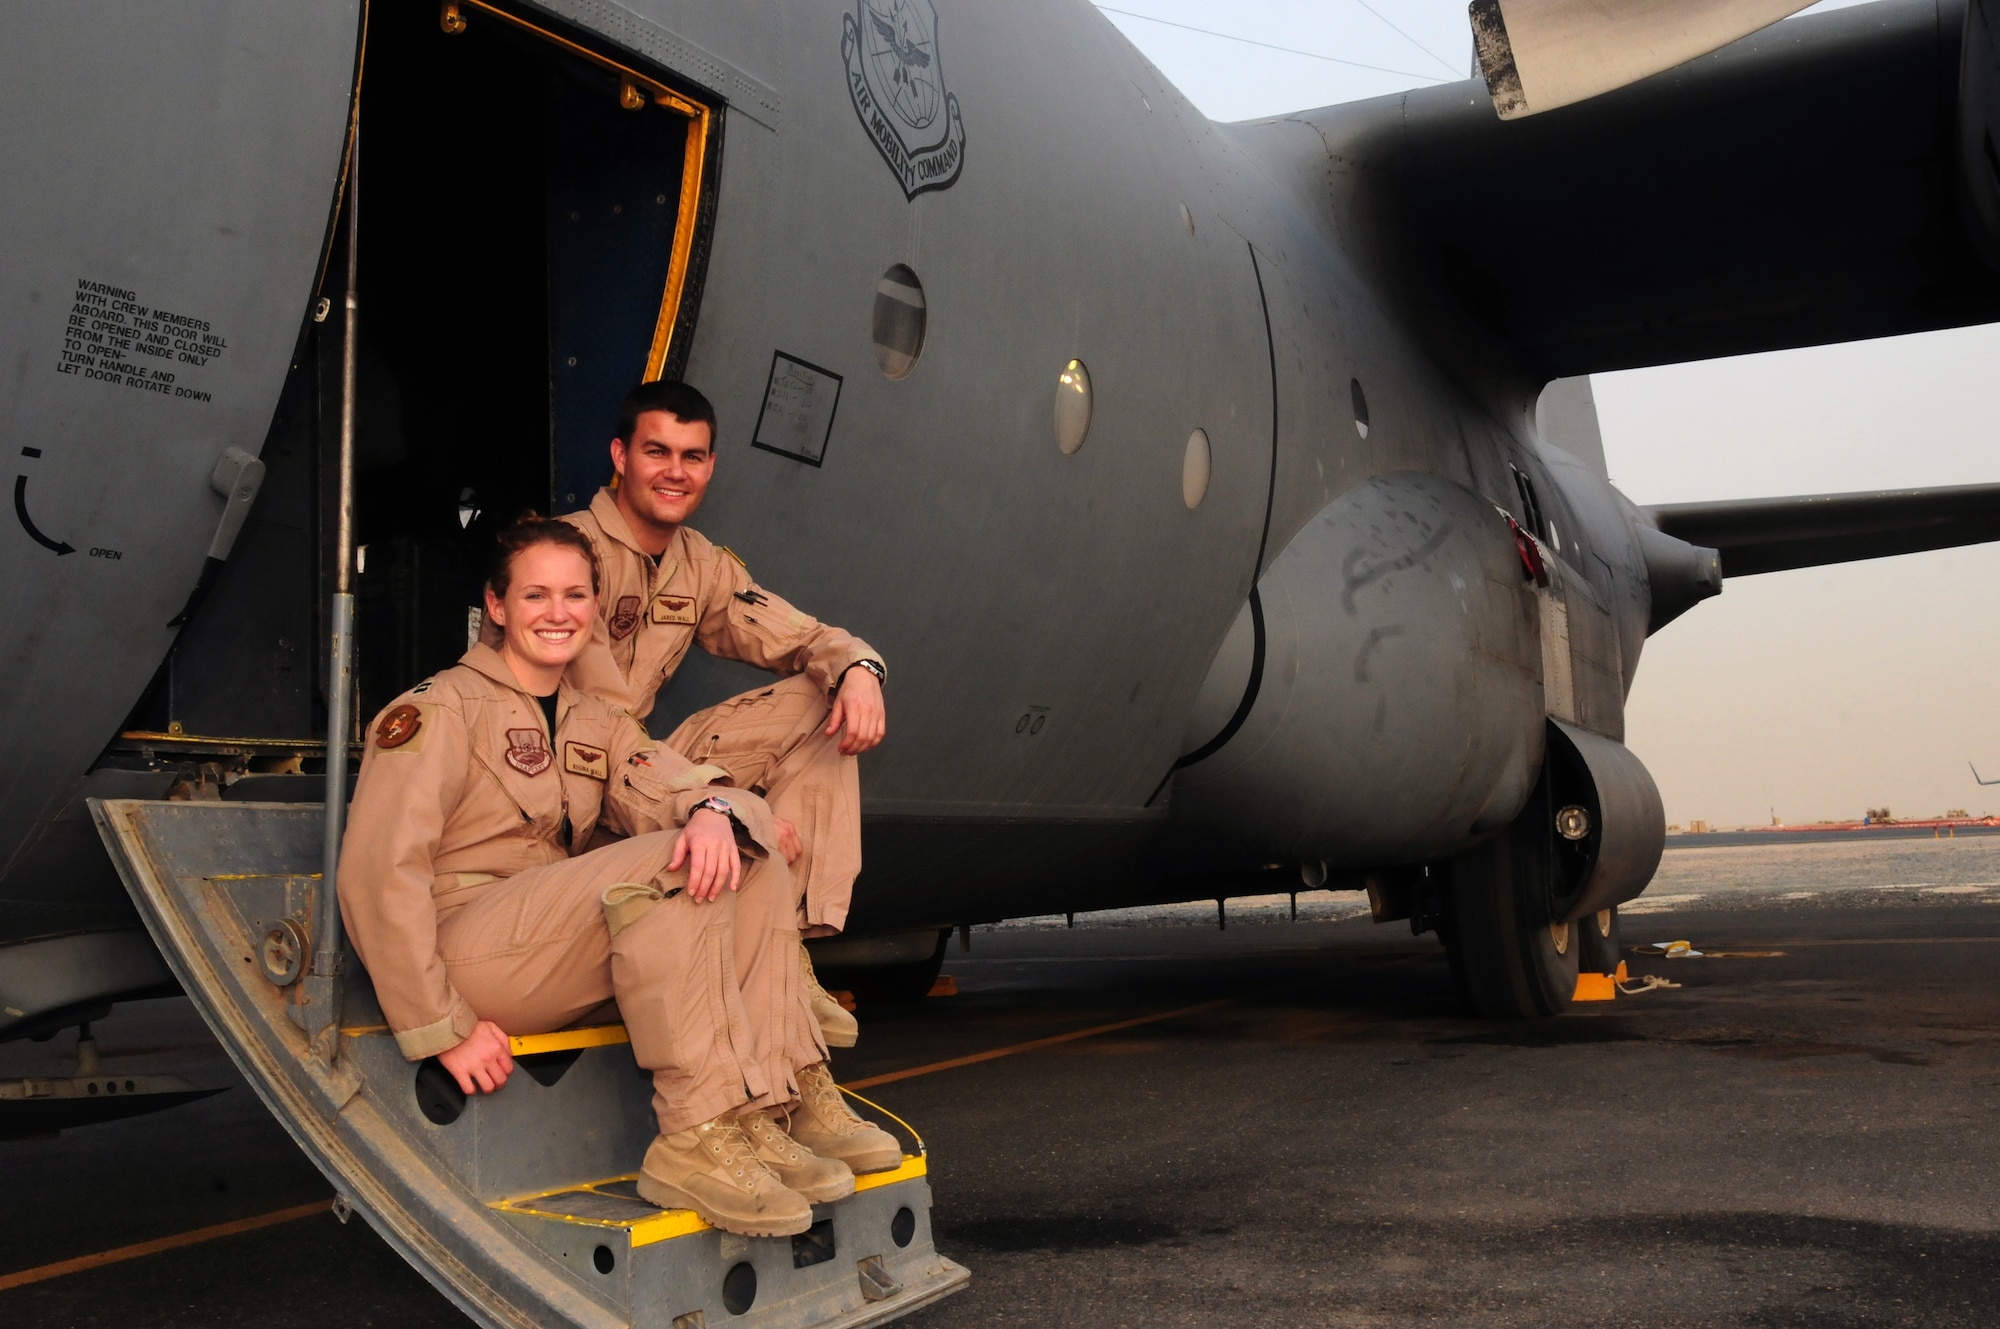 U.S. Air Force Capts. Regina and Jared Wall, C-130 pilots with the 39th Airlift Squadron at Dyess Air Force Base, Texas, are serving on their second deployment together with the 737th Expeditionary Airlift Squadron at an air base in Southwest Asia. (U.S. Air Force photo by Staff Sgt. Lakisha A. Croley/Released)